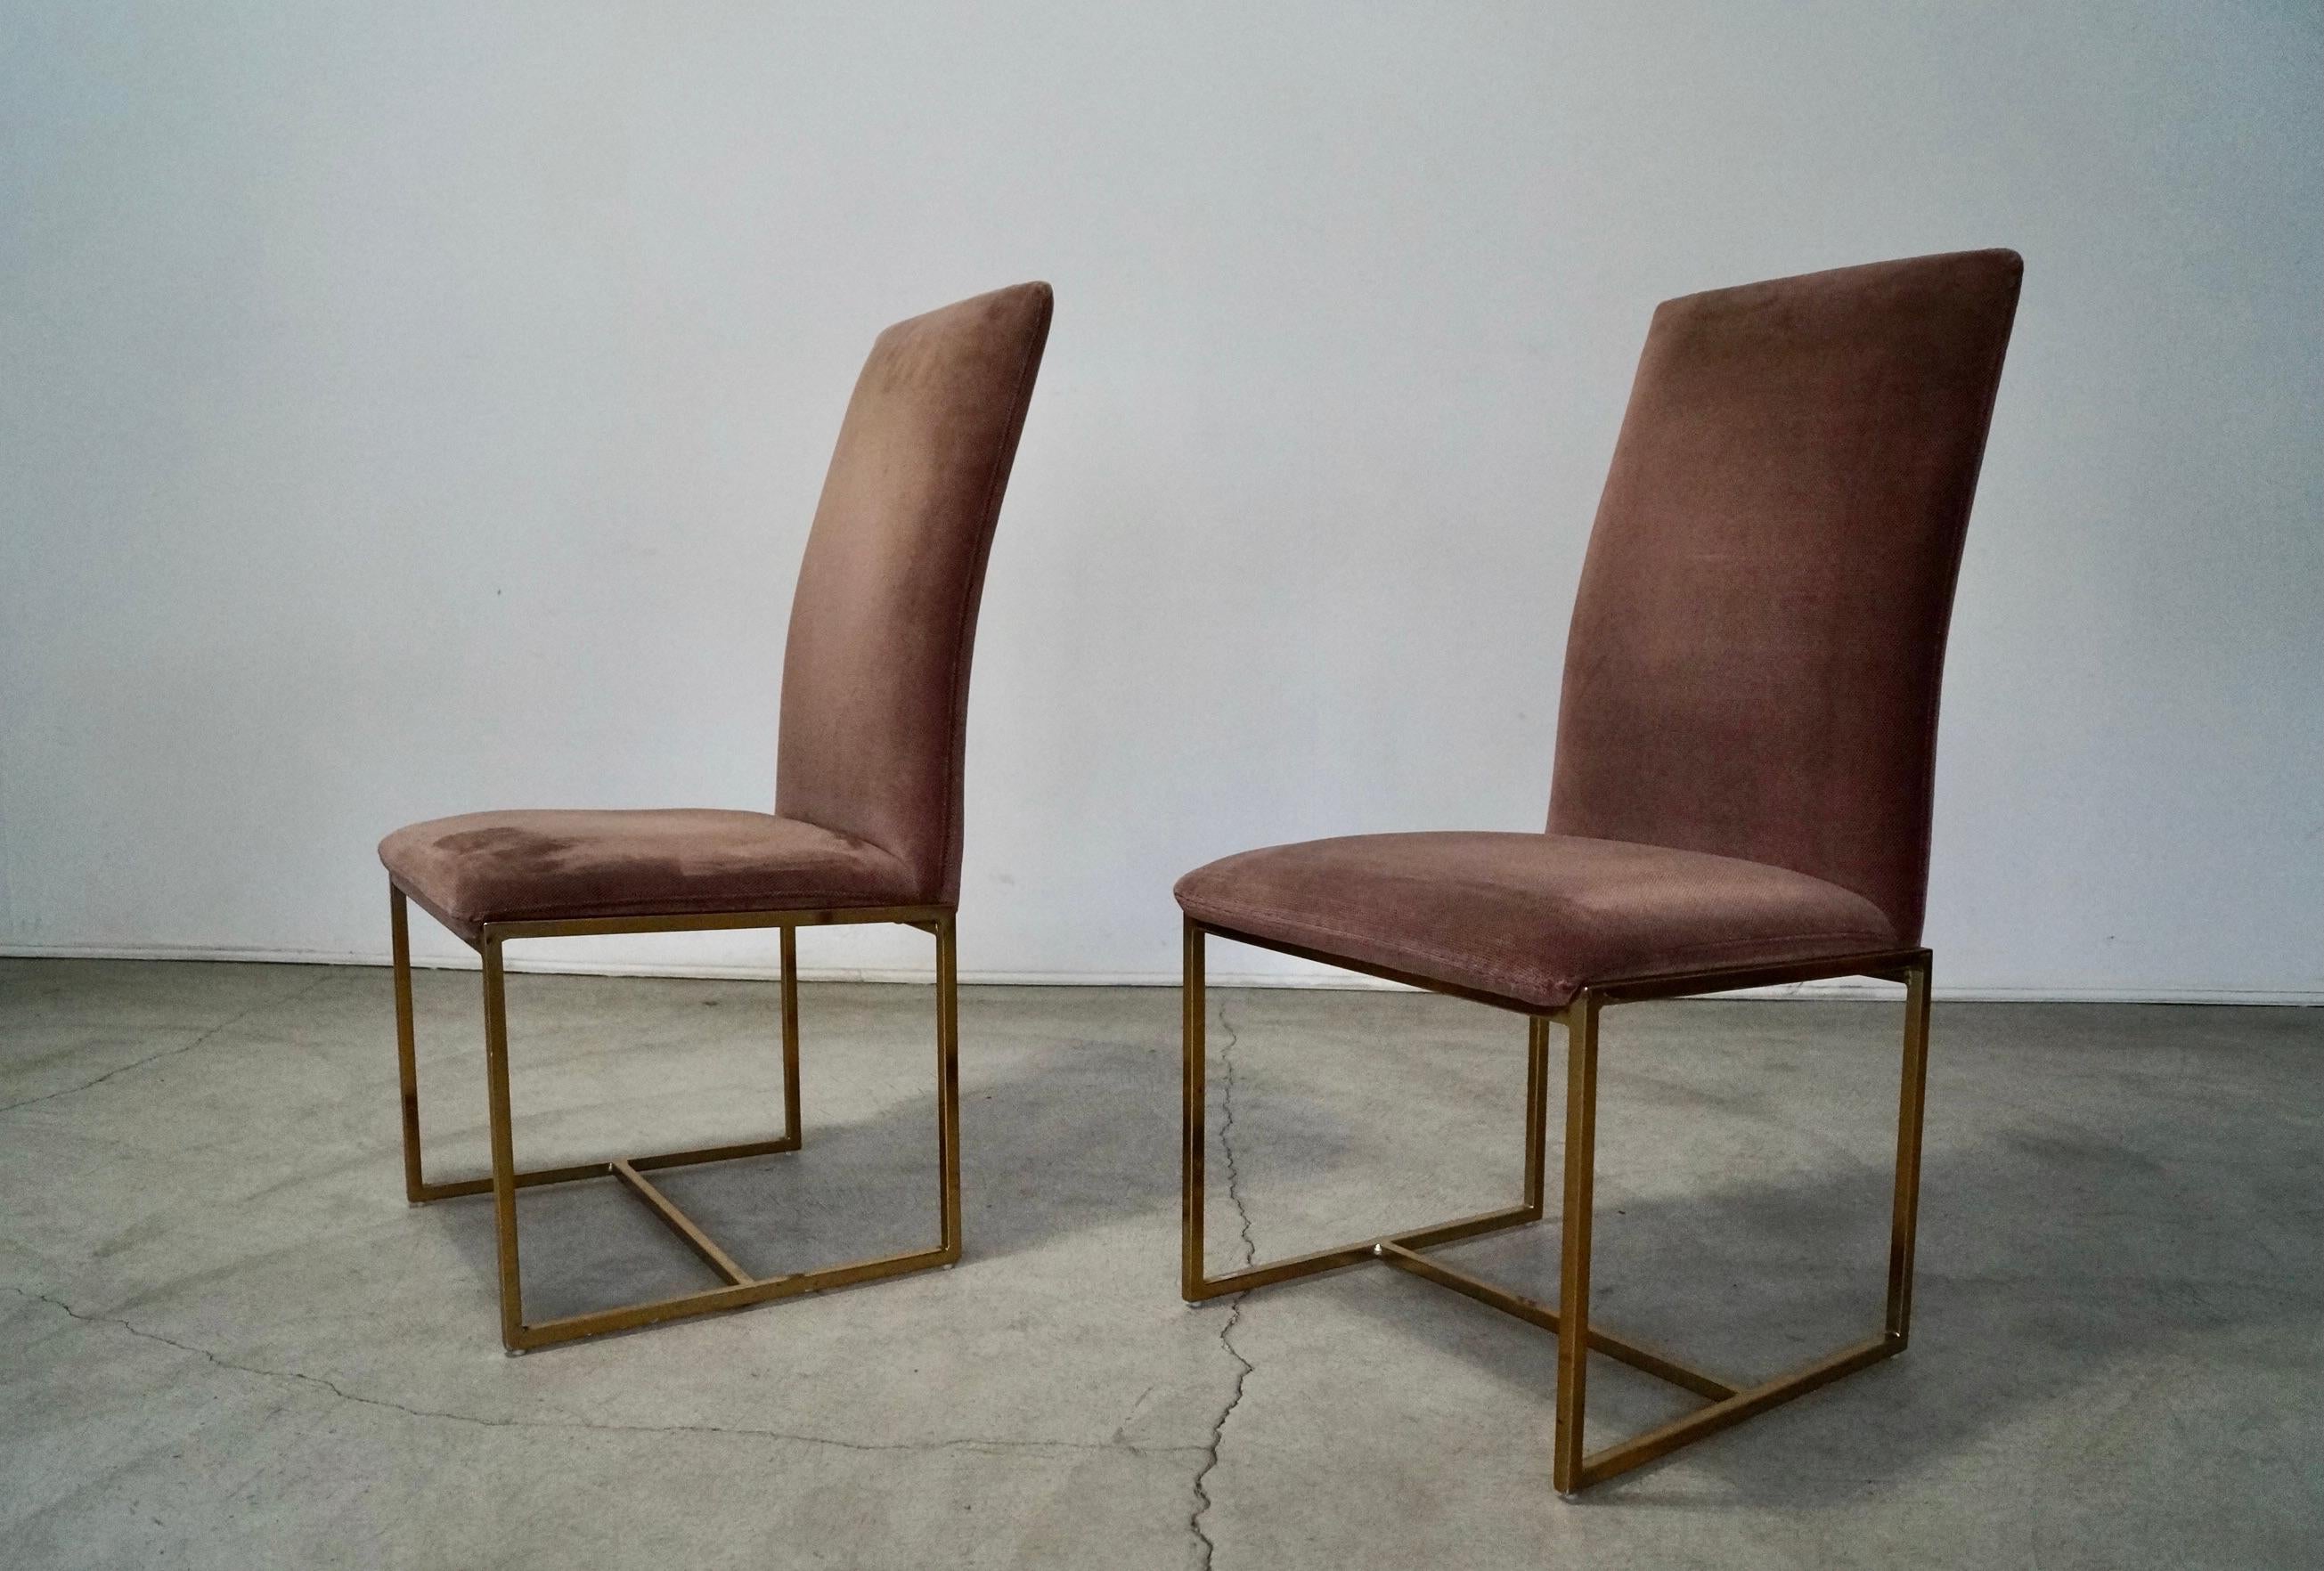 1970's Mid-Century Modern Milo Baughman Style Brass Dining Chairs - a Pair For Sale 5